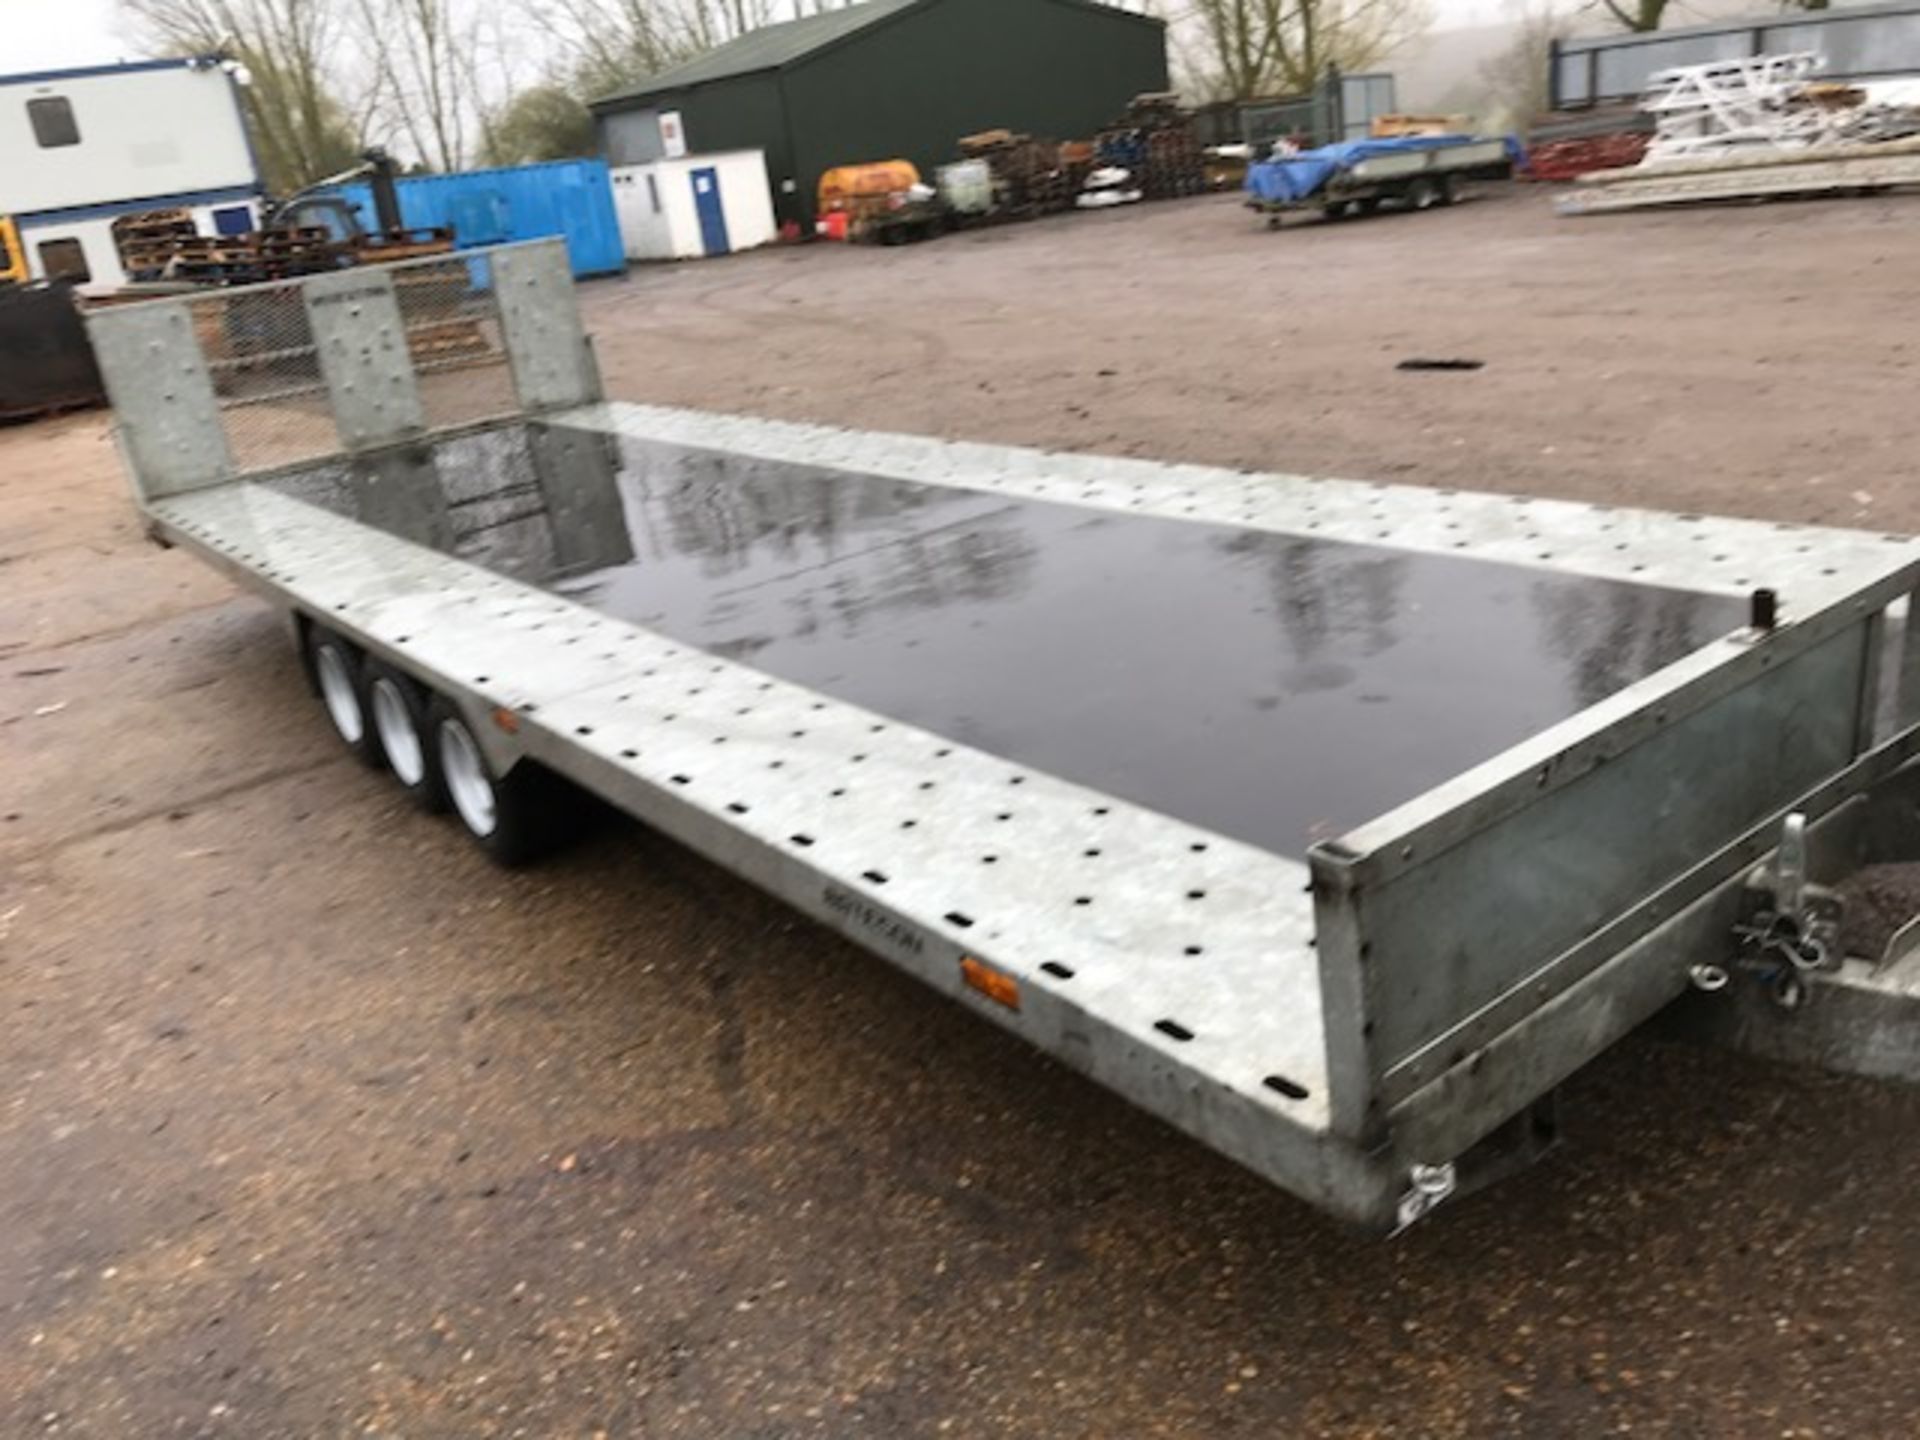 BATESON TILT BED TRIAXLED TRAILER YEAR 2015. OWNED FROM NEW. DATA TAGGED. 20FT X 7FT BED SIZE. - Image 5 of 14